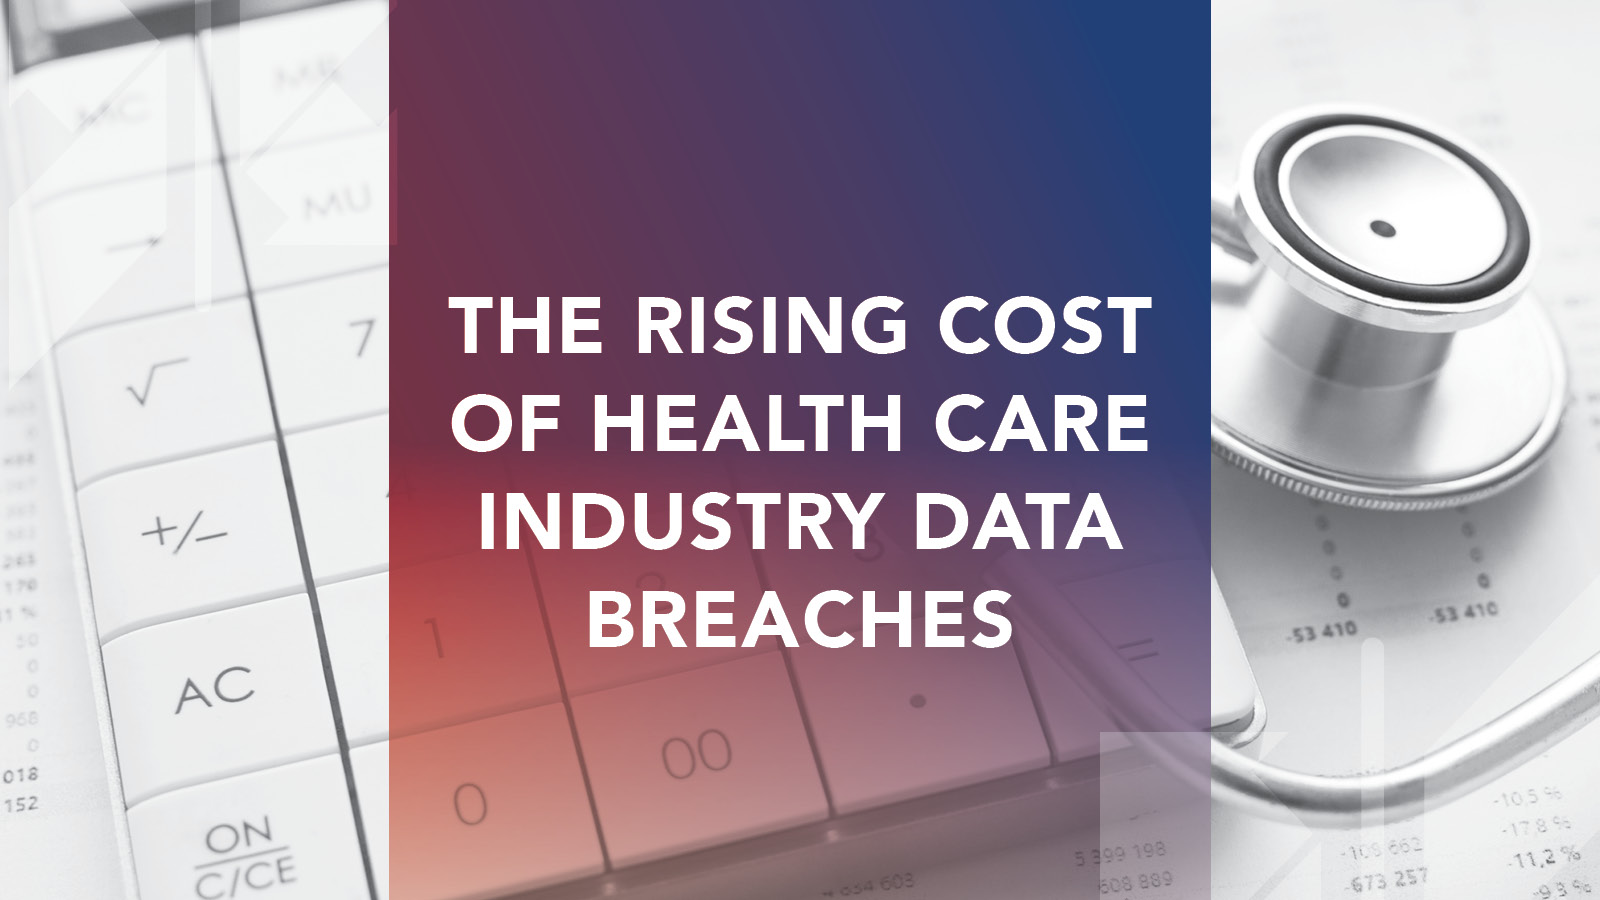 THE RISING COST OF HEALTH CARE INDUSTRY DATA BREACHES